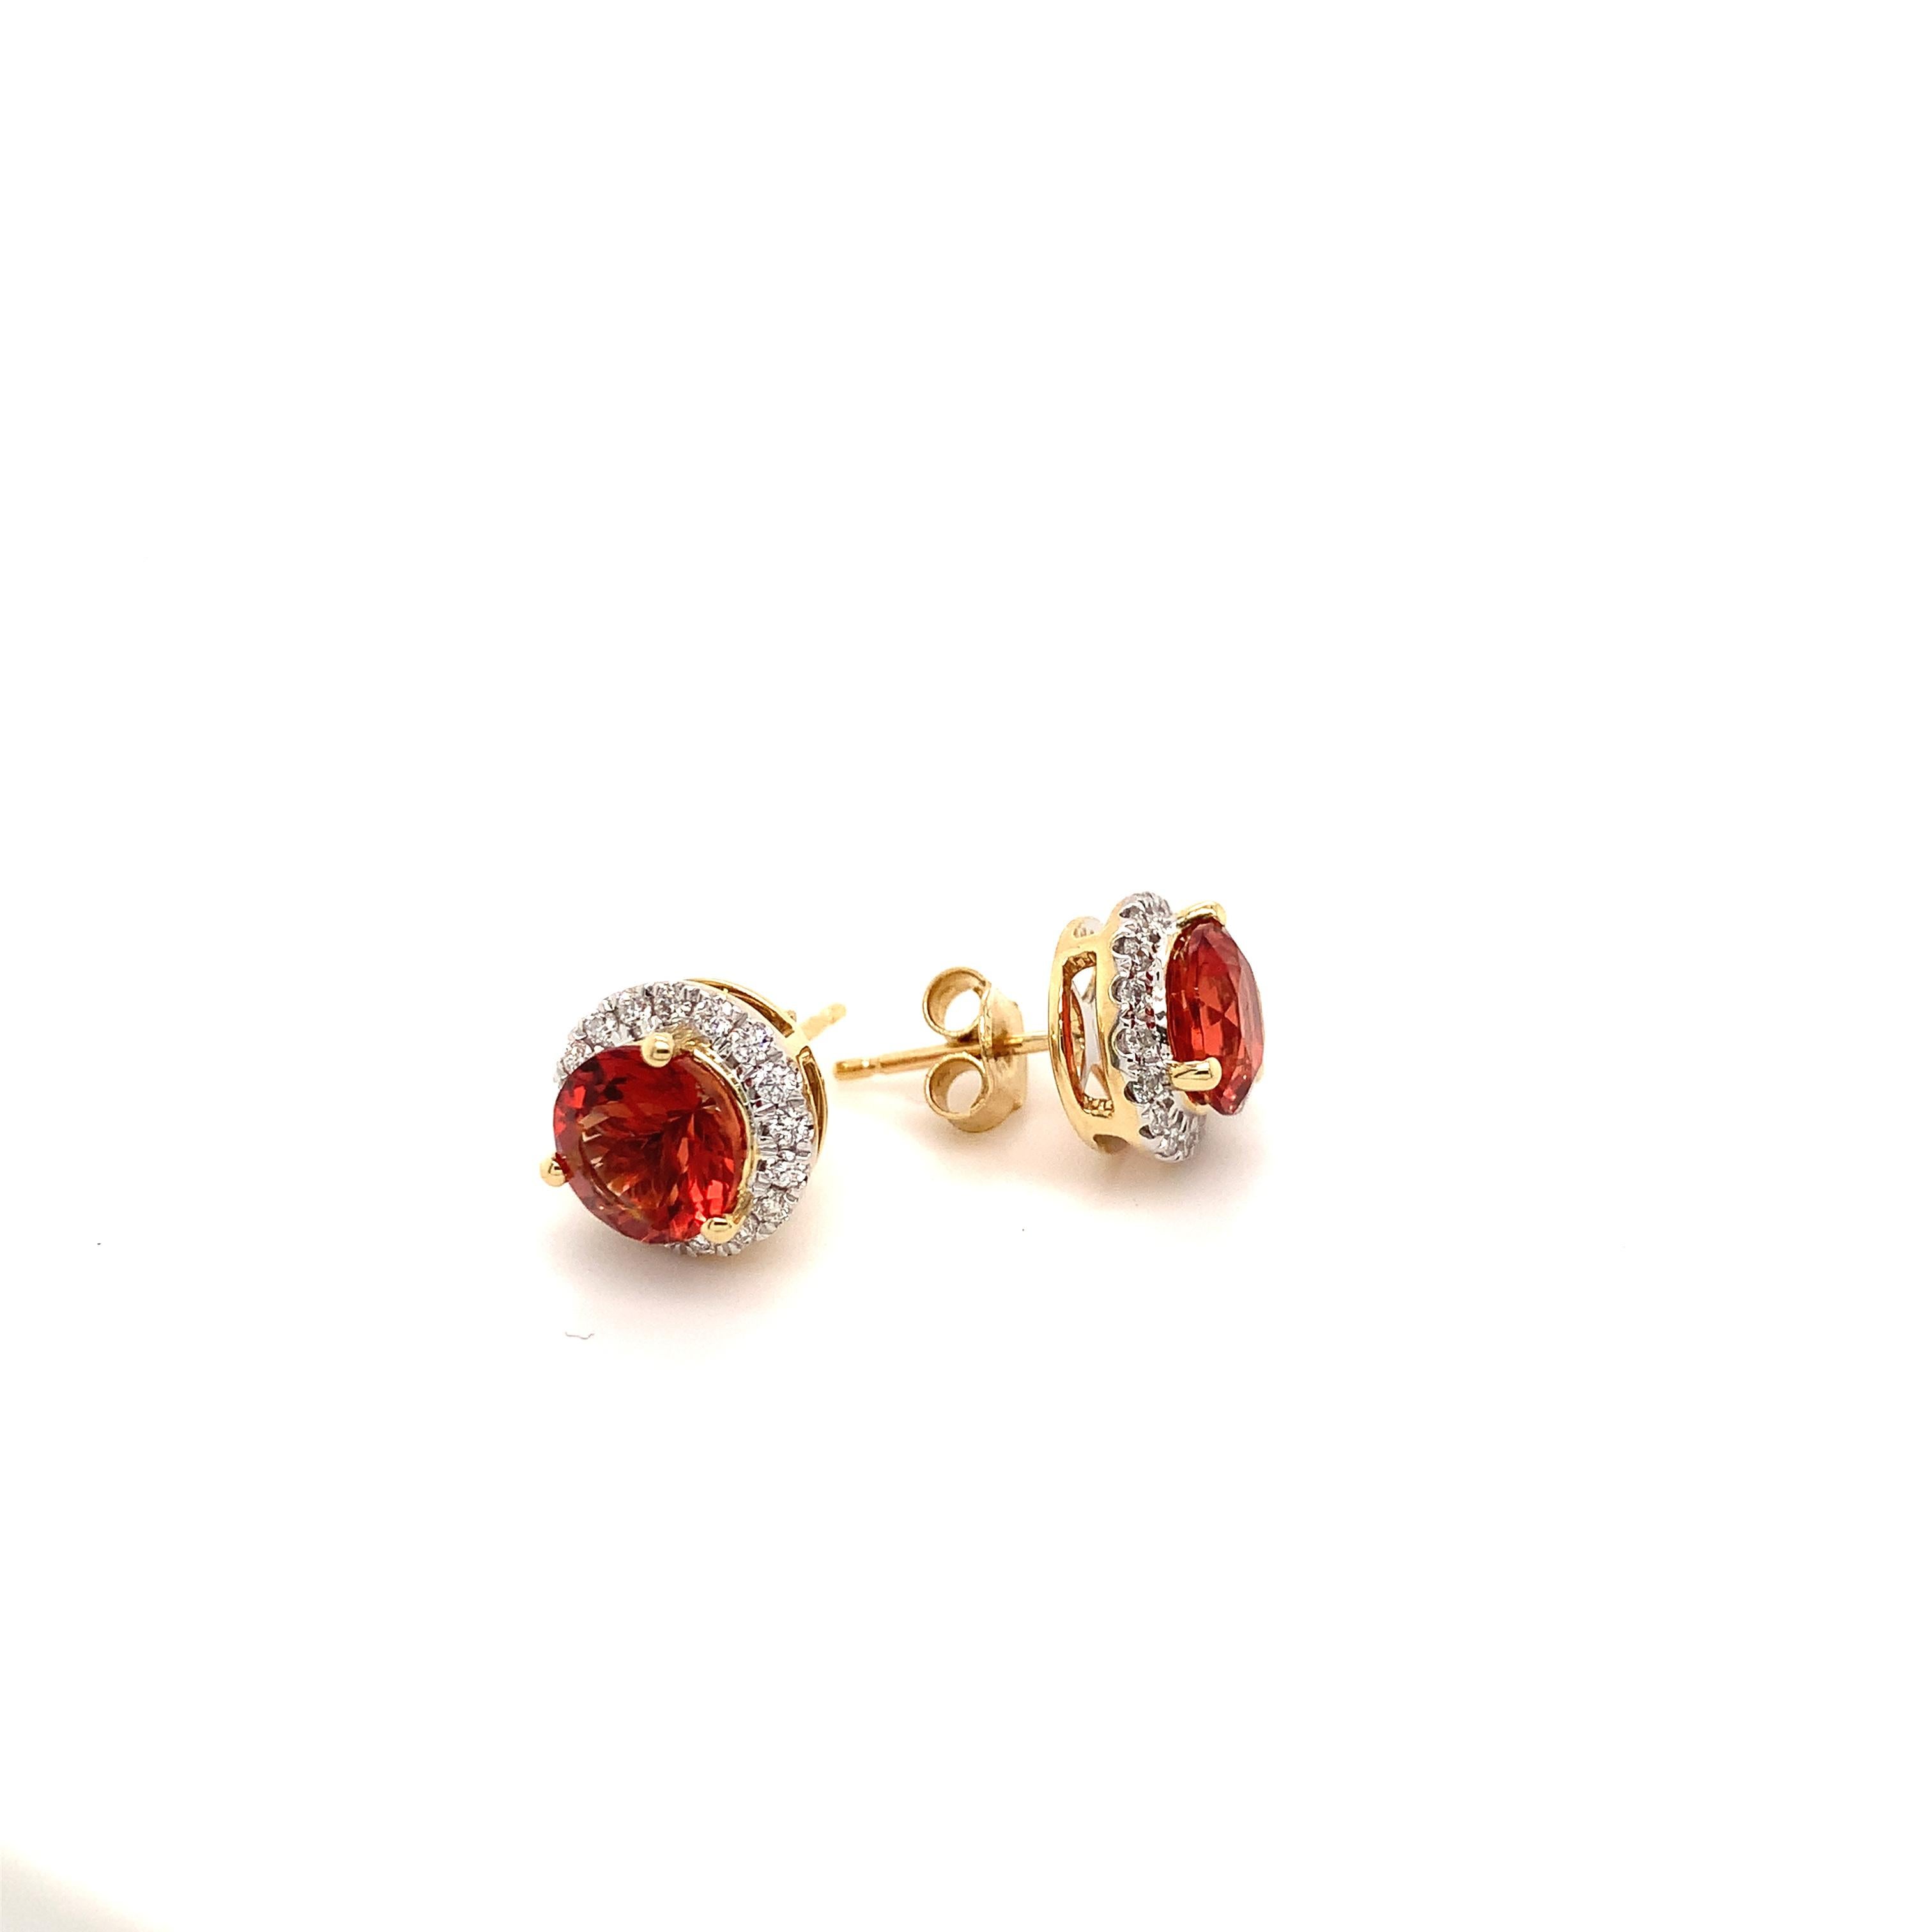 Orange / red Oregon Sunstone are hard to find, particularly a matched pair. This pair of 7 mm brilliant faceted rounds weigh a total of 2.5 carats. The halo, two tone 14-karat gold stud earrings have a total of 44 Diamond, 22 in each earring, that